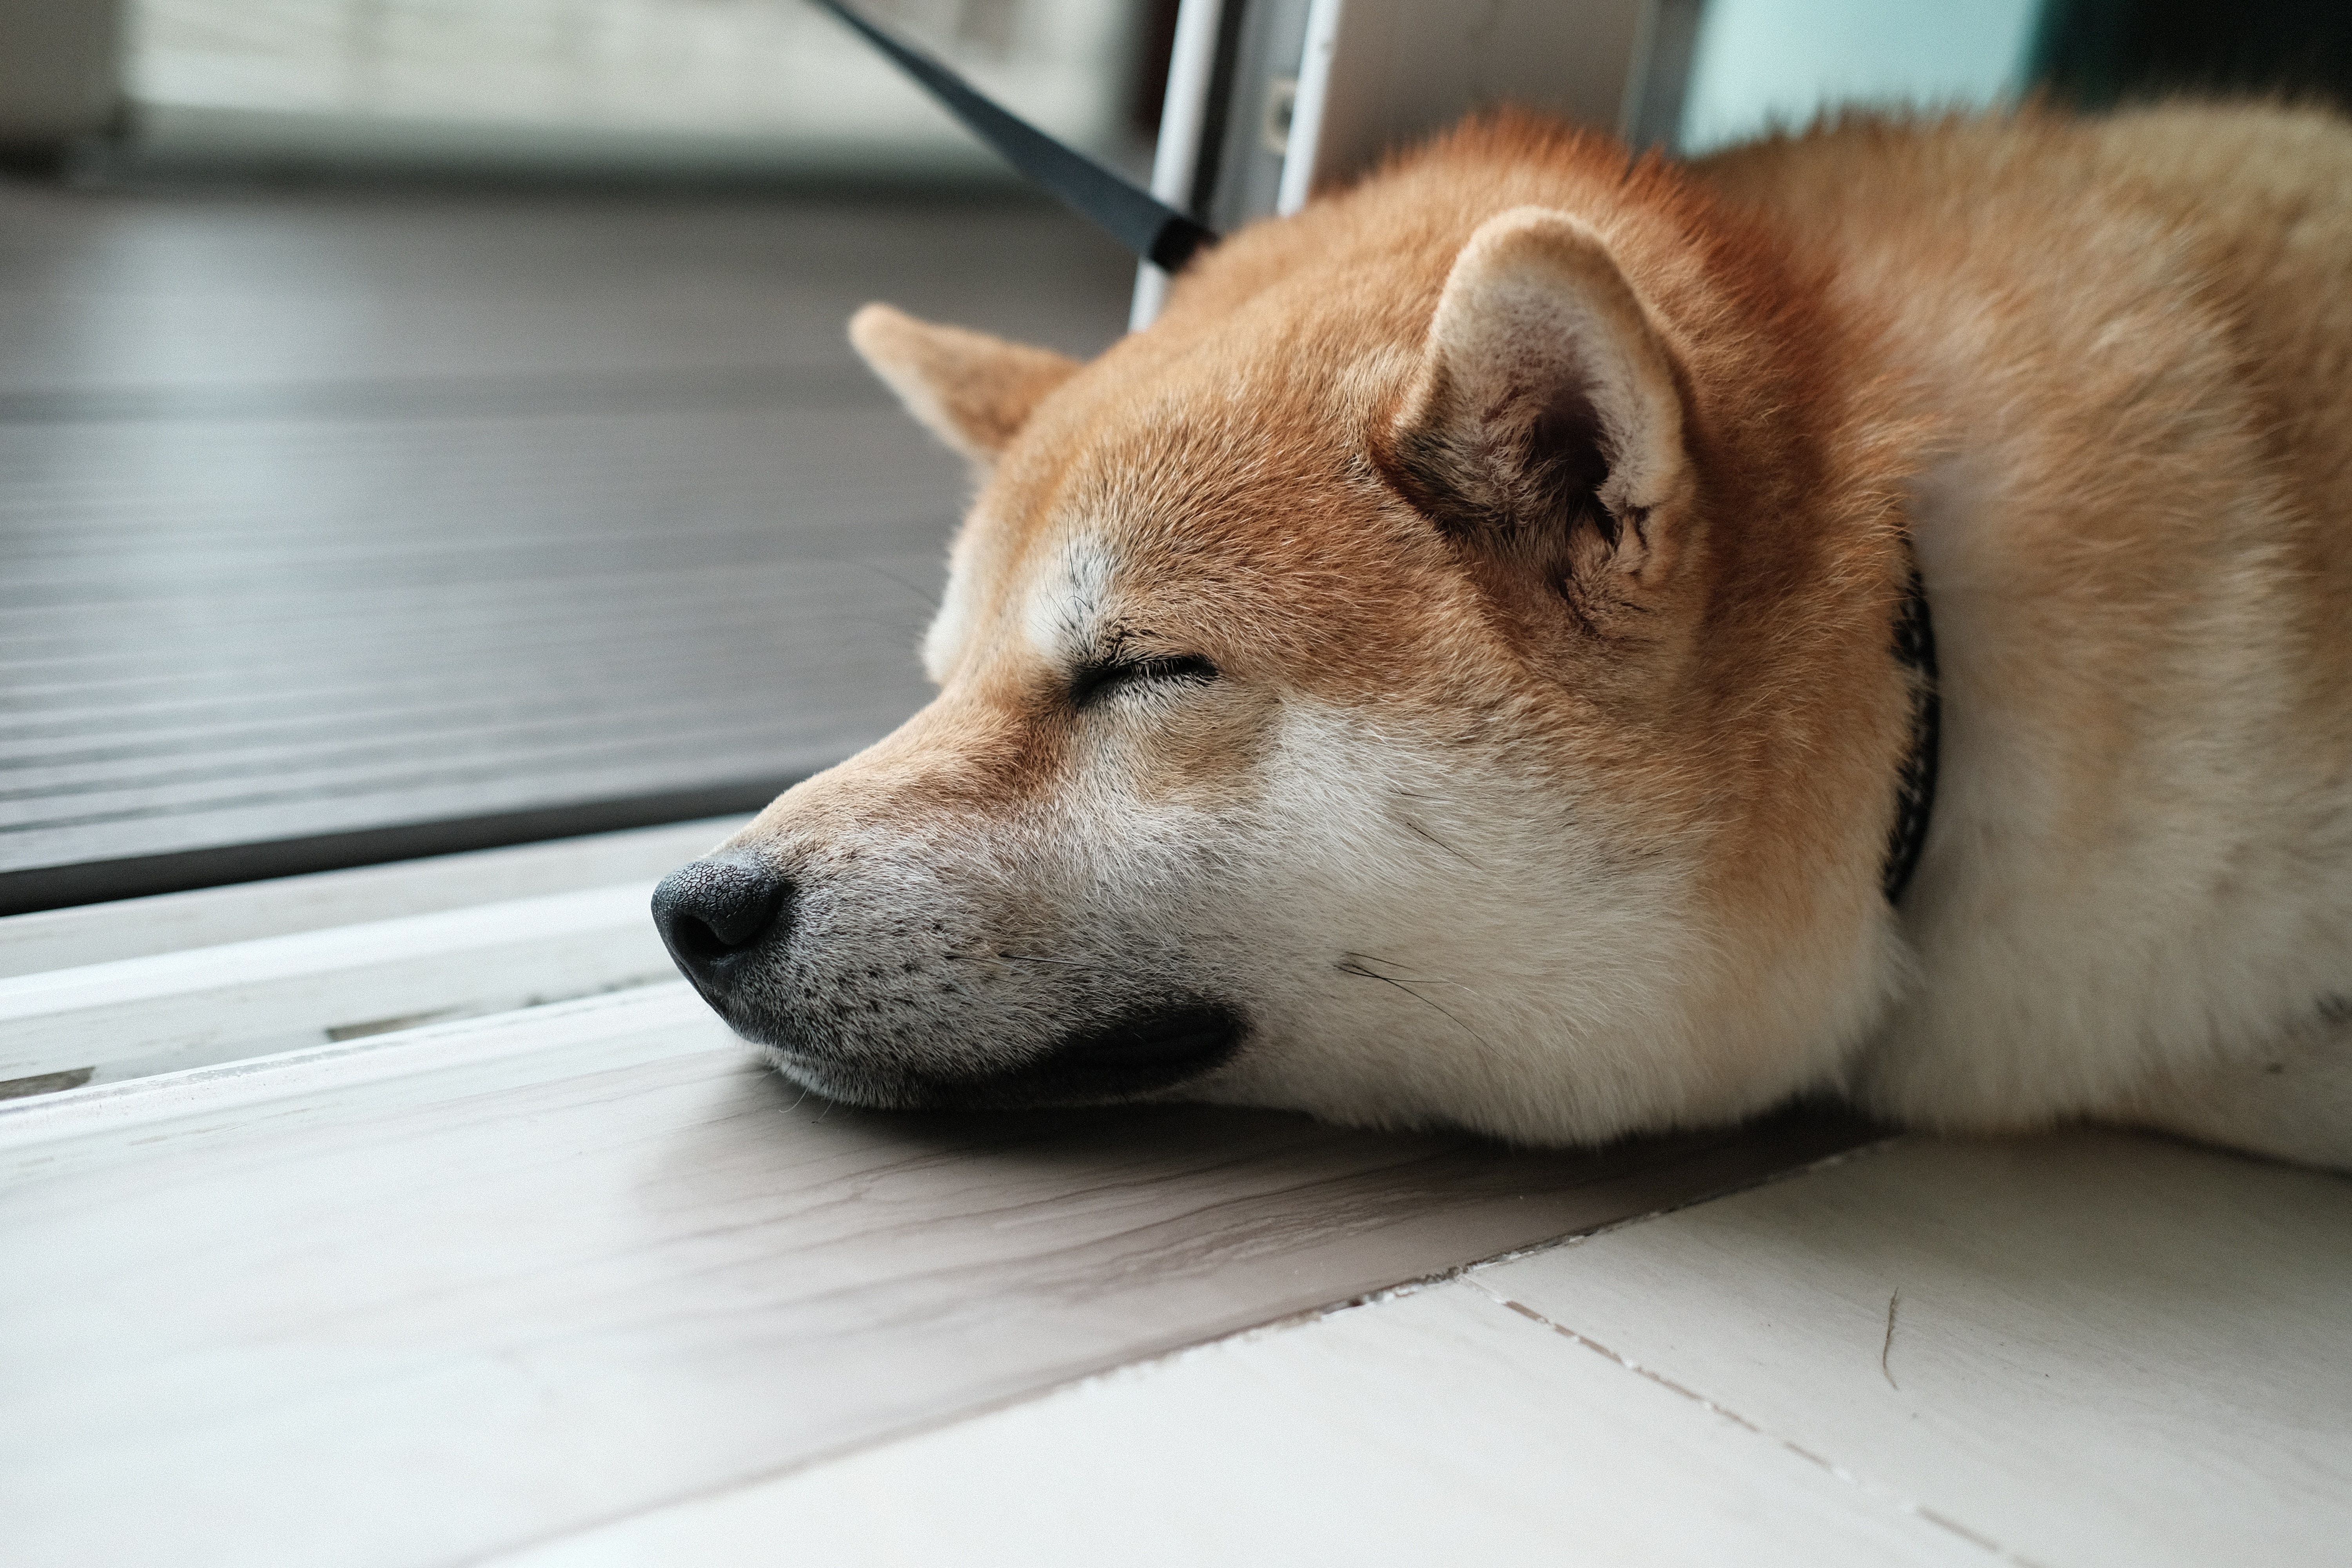 Dogecoin's Climb To $1 By Year-End: A Possibility Or A Pipedream?